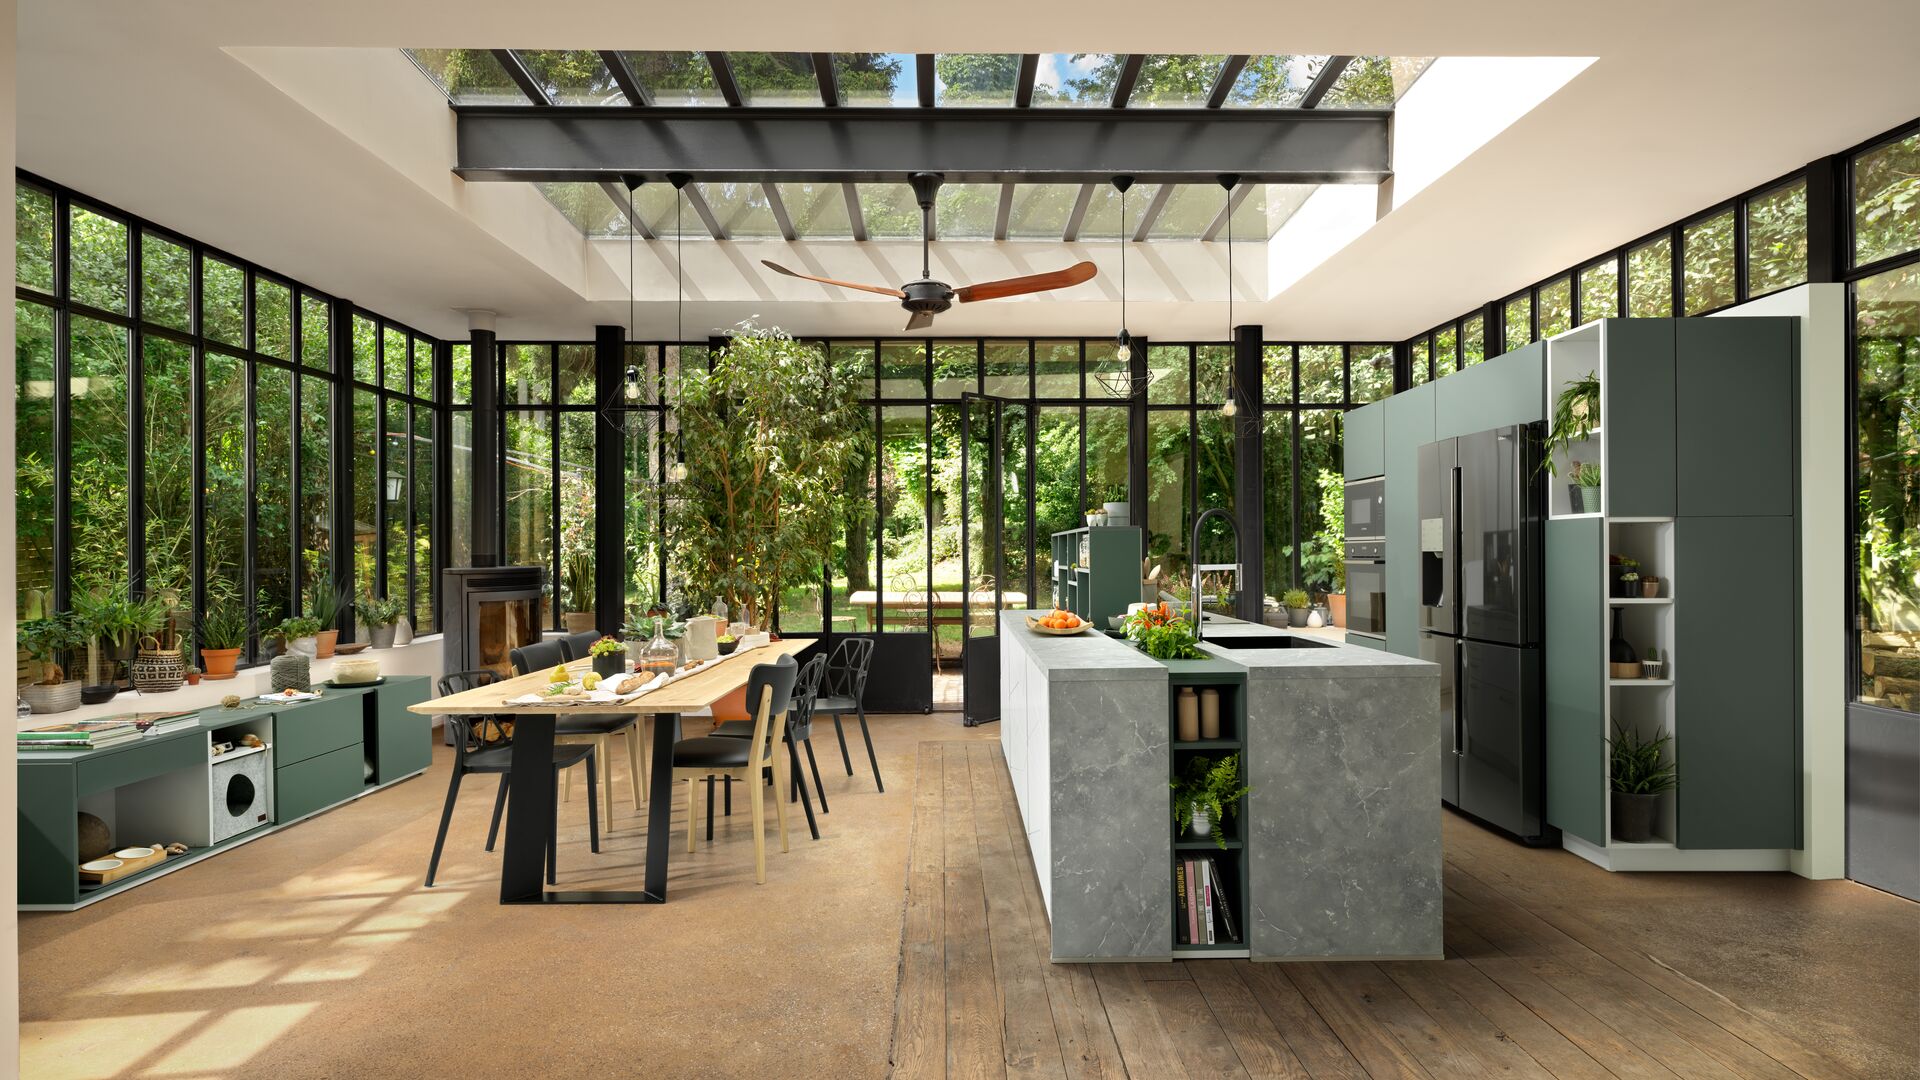 Grey-green kitchen with island and glass panelling with garden view, natural, plant-inspired appearance